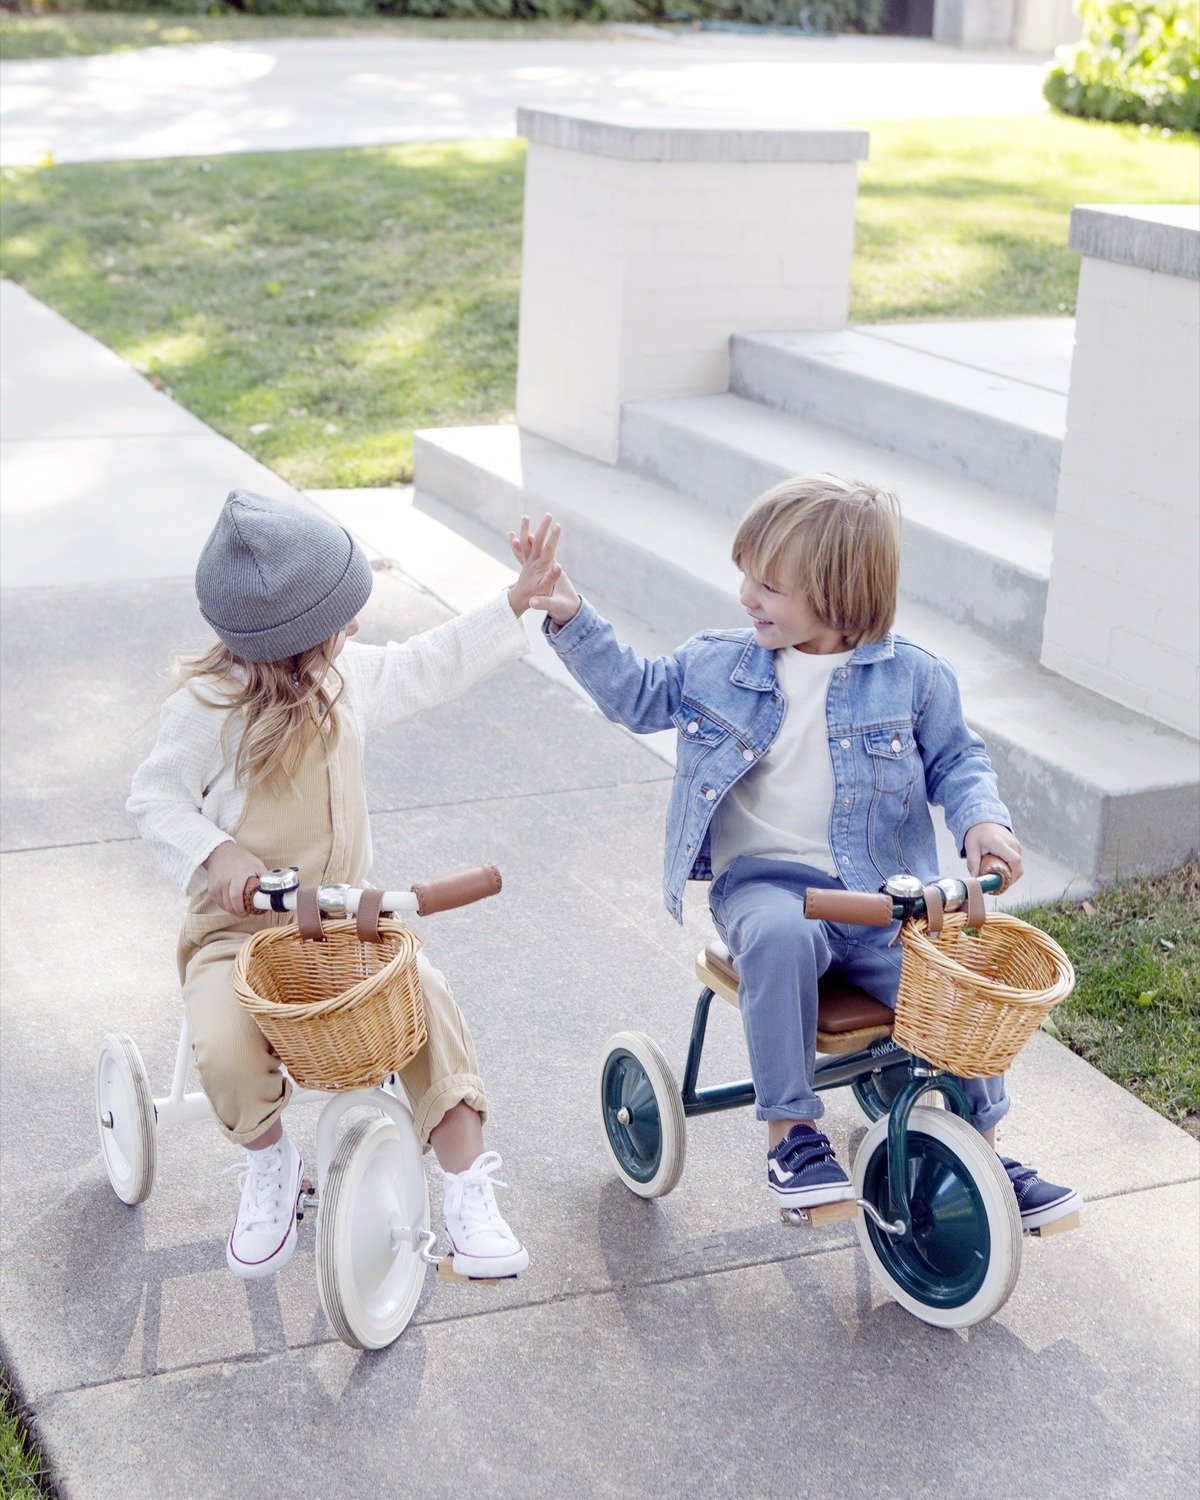 Create Happy Childhood Memories 💛 @banwoodbikes is the original classic children&rsquo;s active lifestyle brand, built to last for generations. The luxury bikes, trikes, scooters and new skateboards, safety gear and carry straps come in a range of c